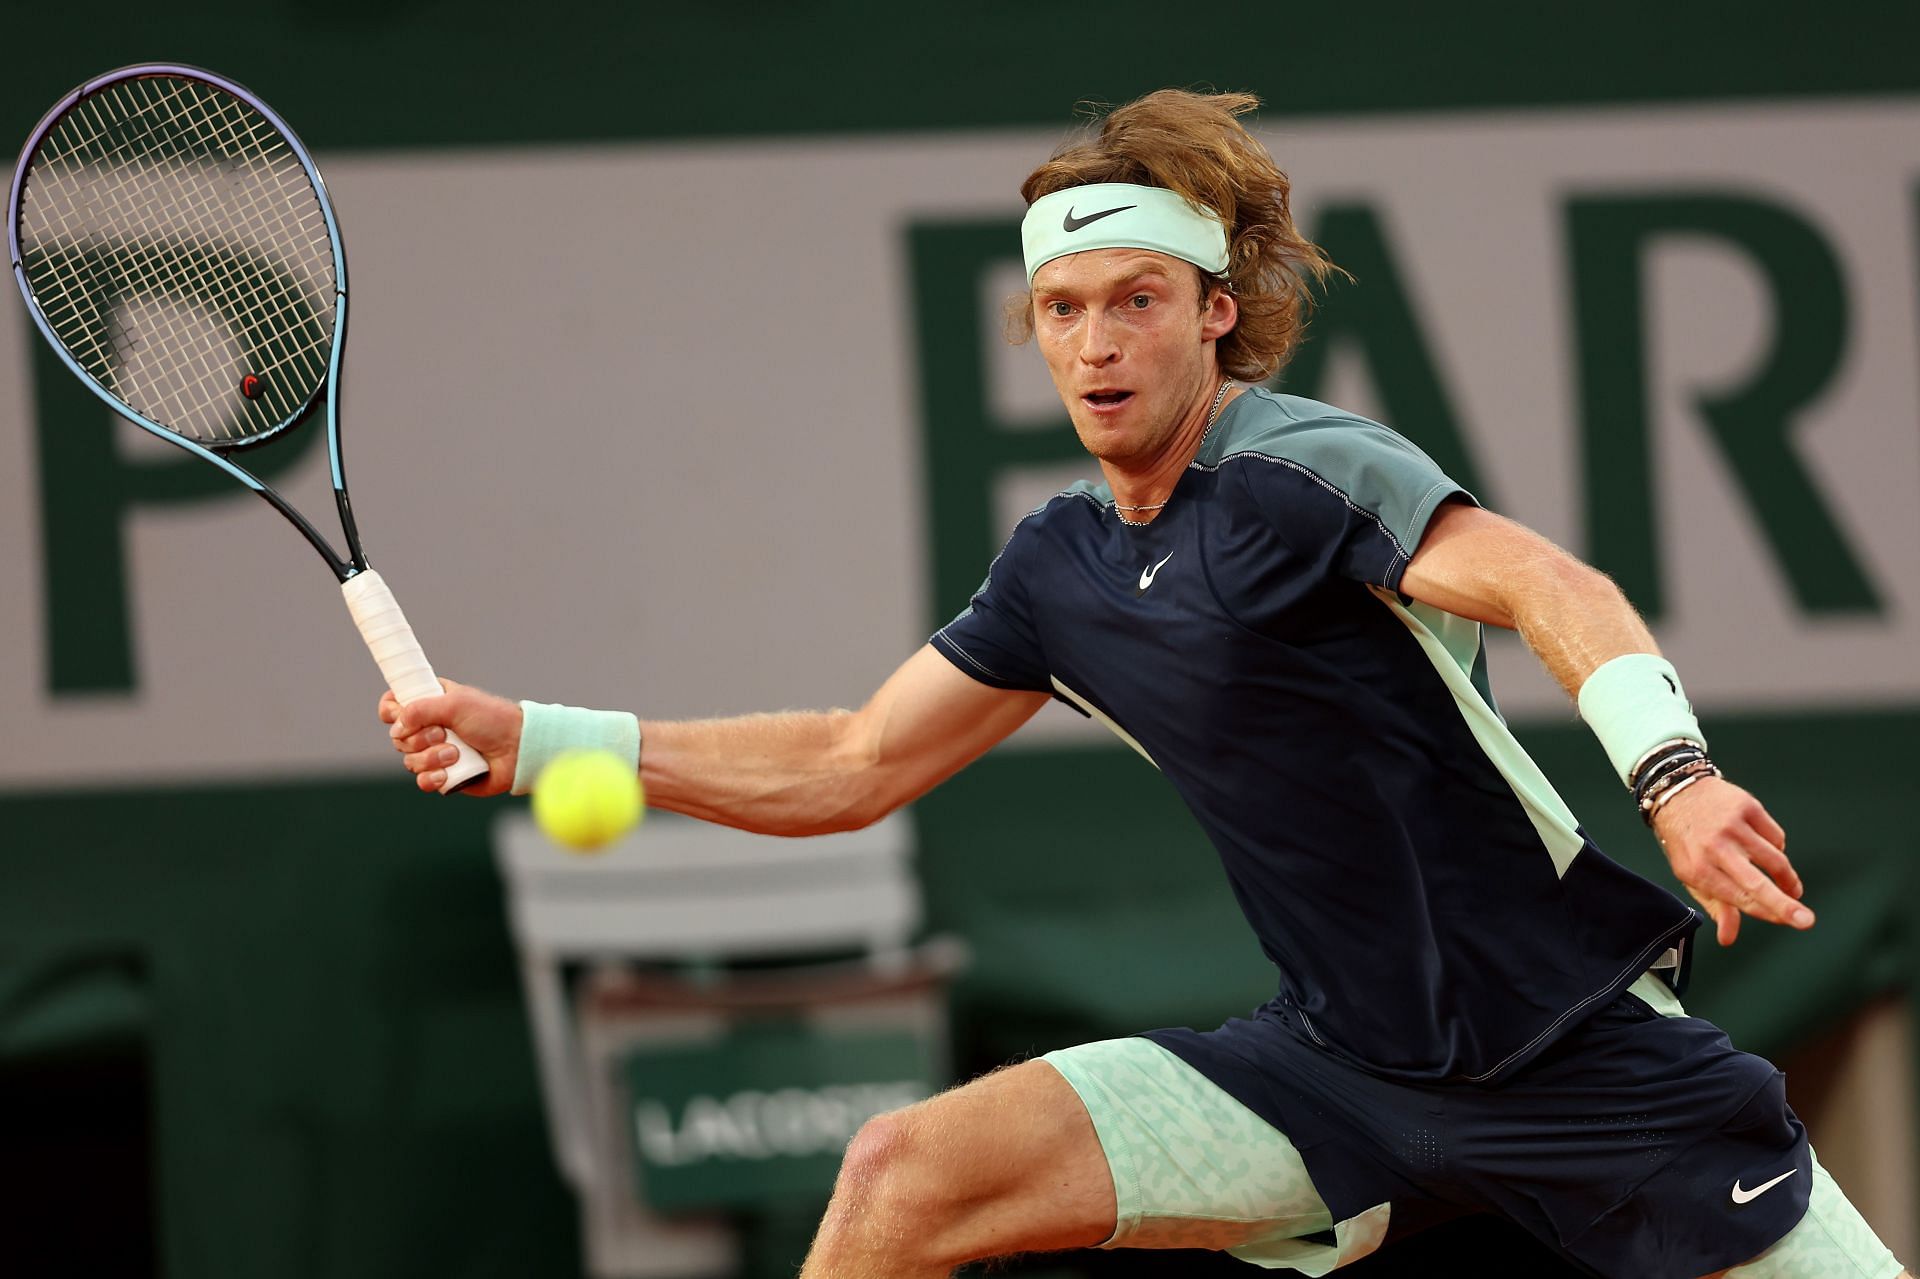 Andrey Rublev at the 2022 French Open